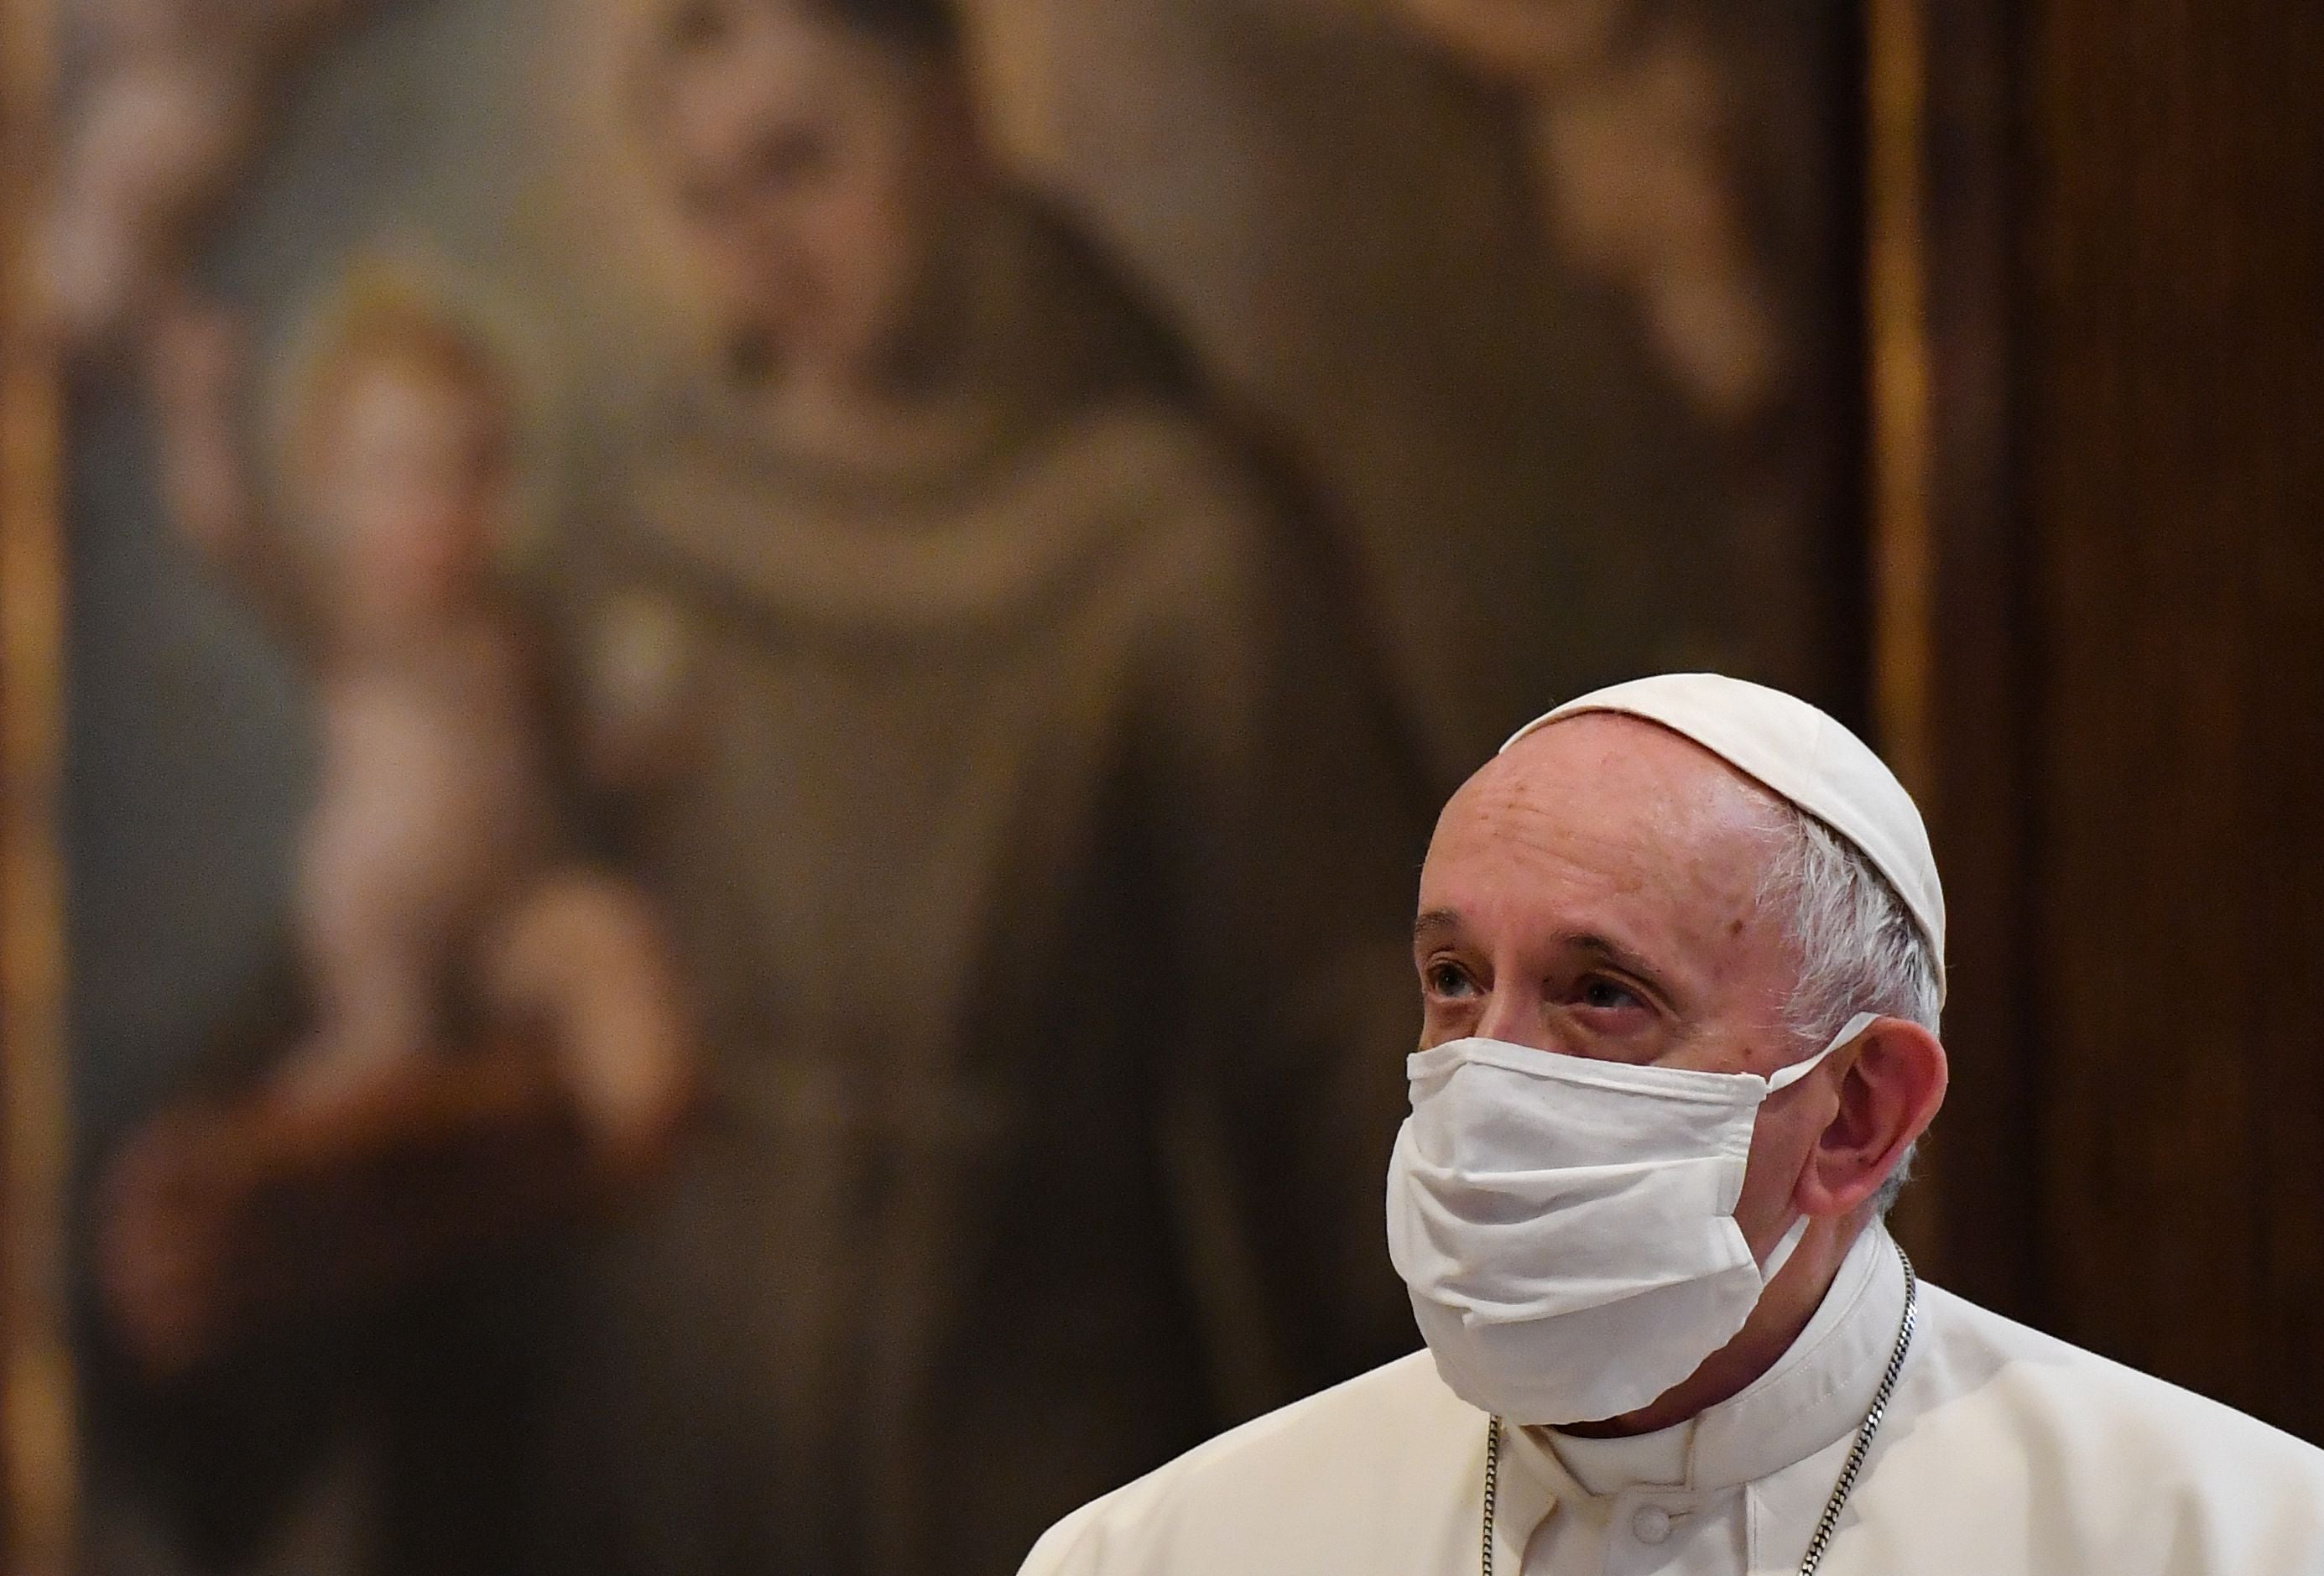 Inoculating the Pope marks another step in the Catholic church’s endorsement of the vaccine